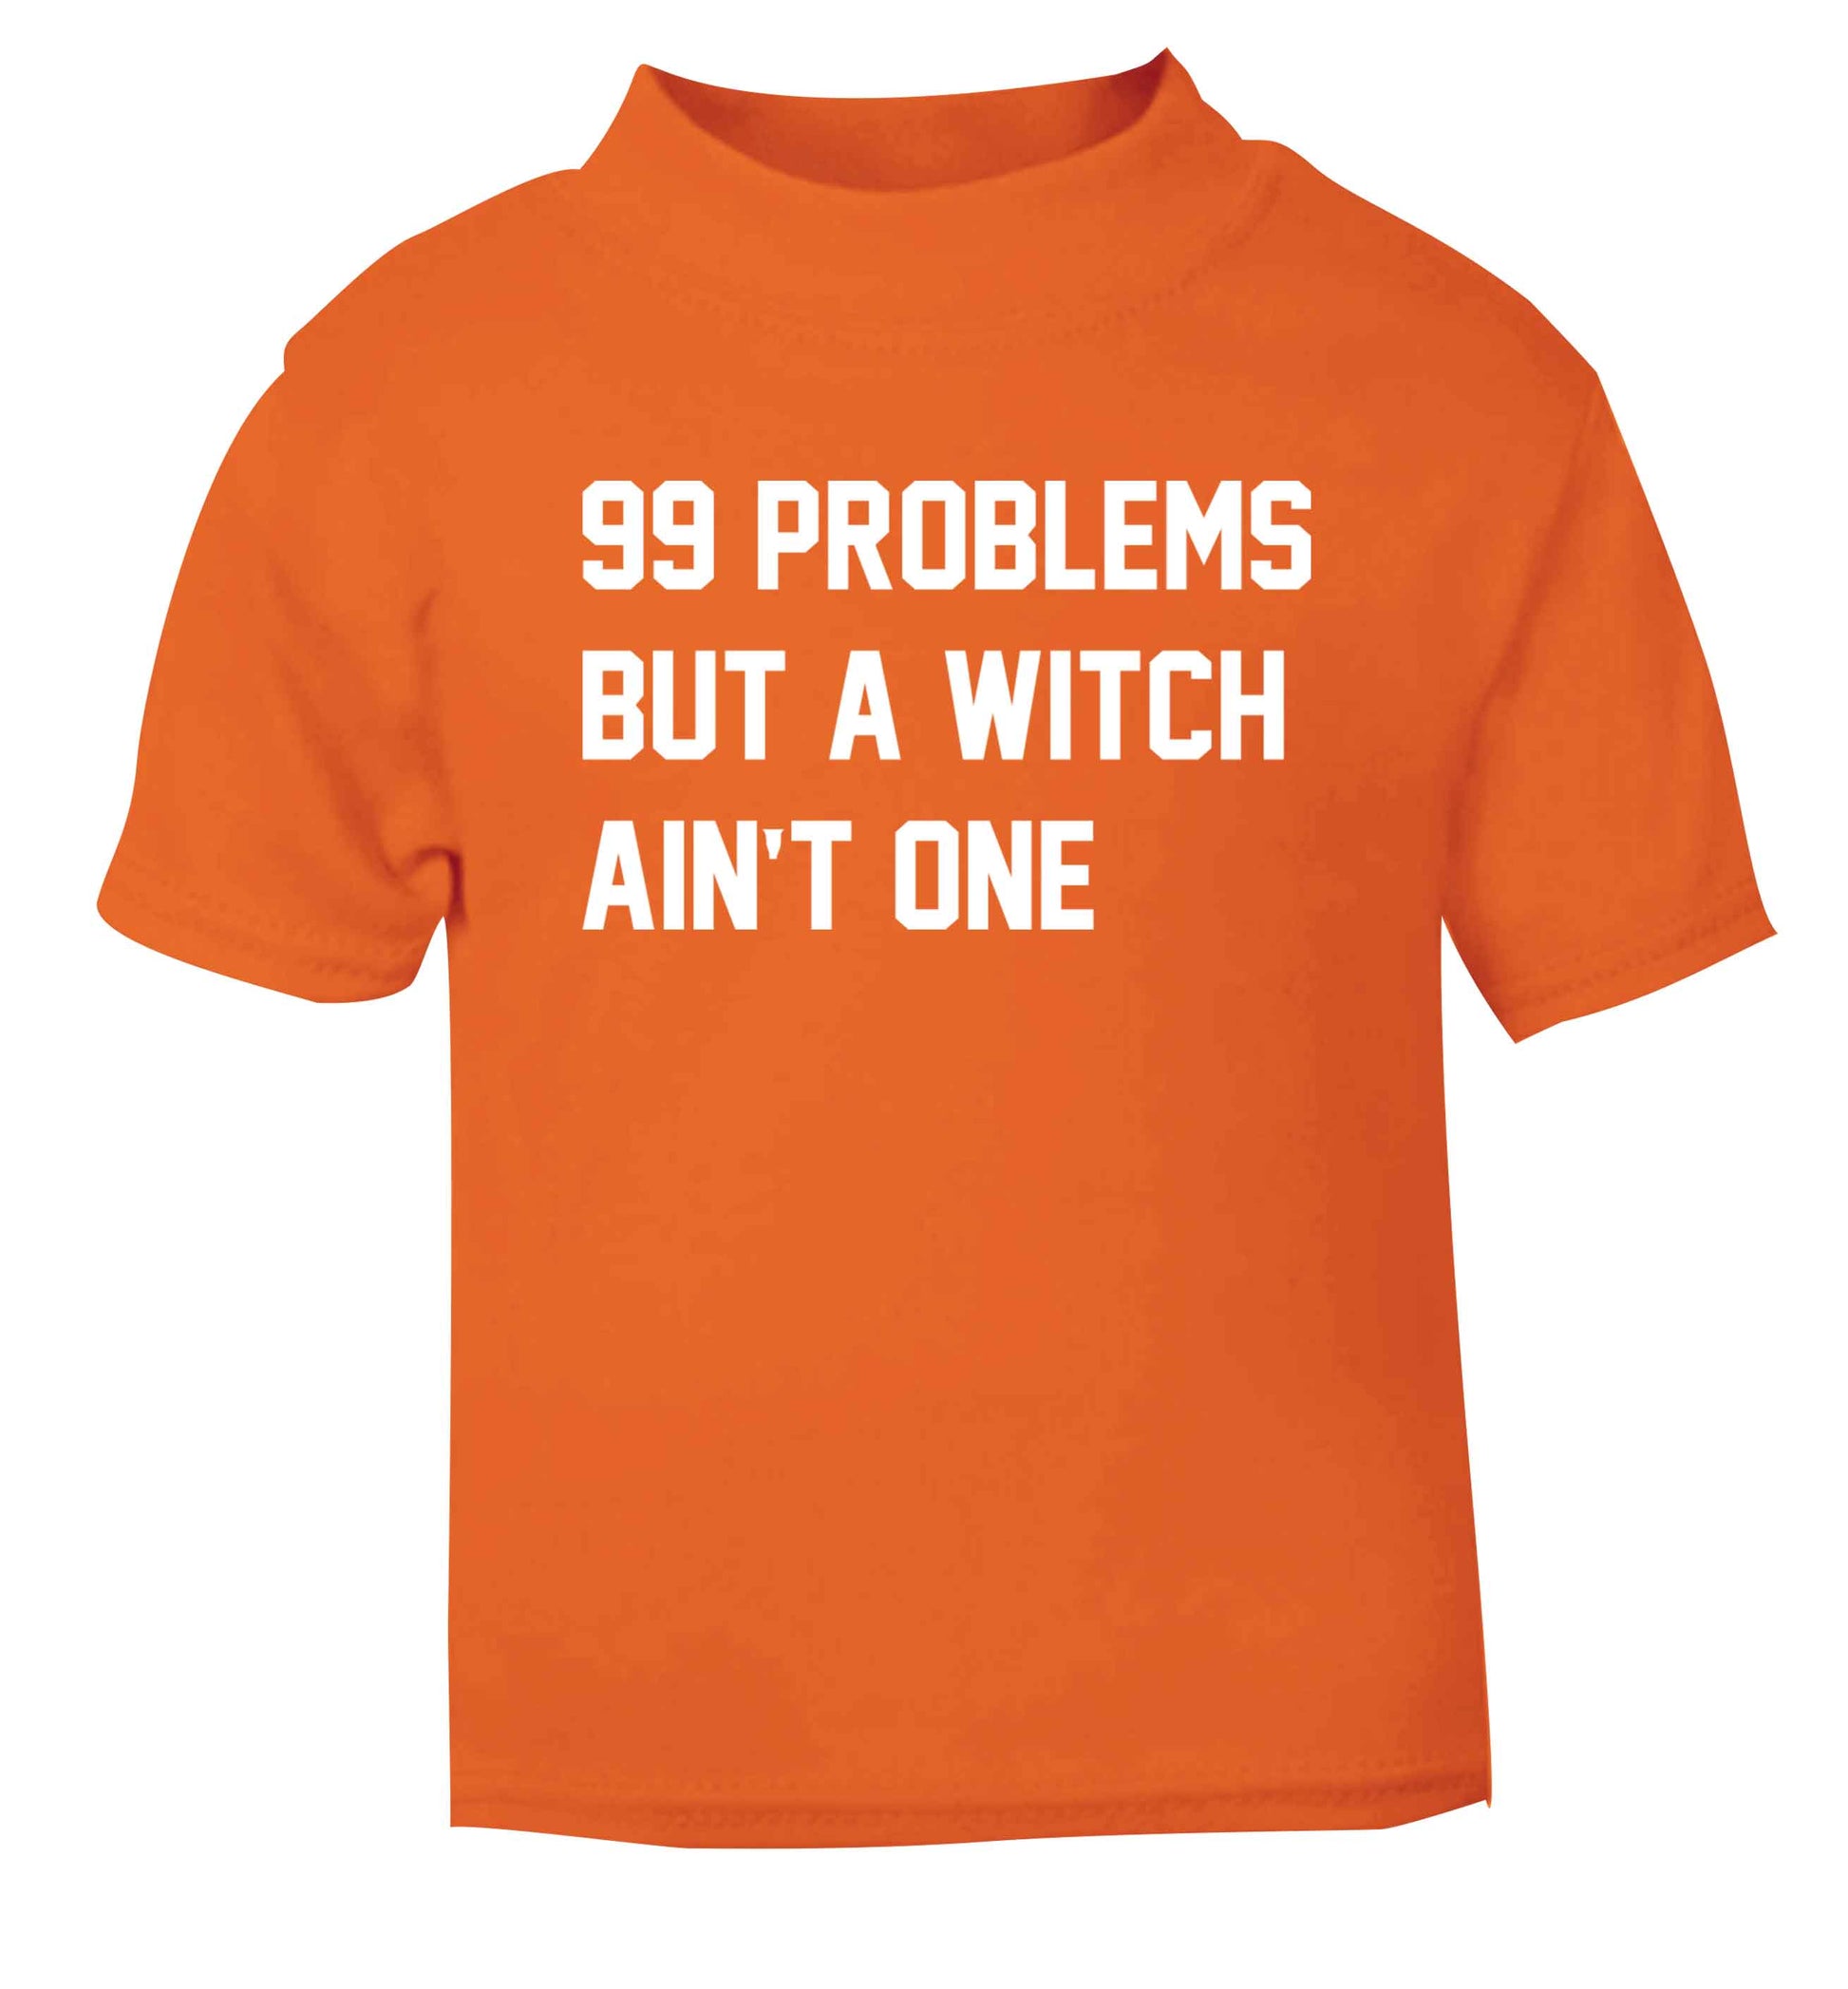 99 Problems but a witch aint one orange baby toddler Tshirt 2 Years